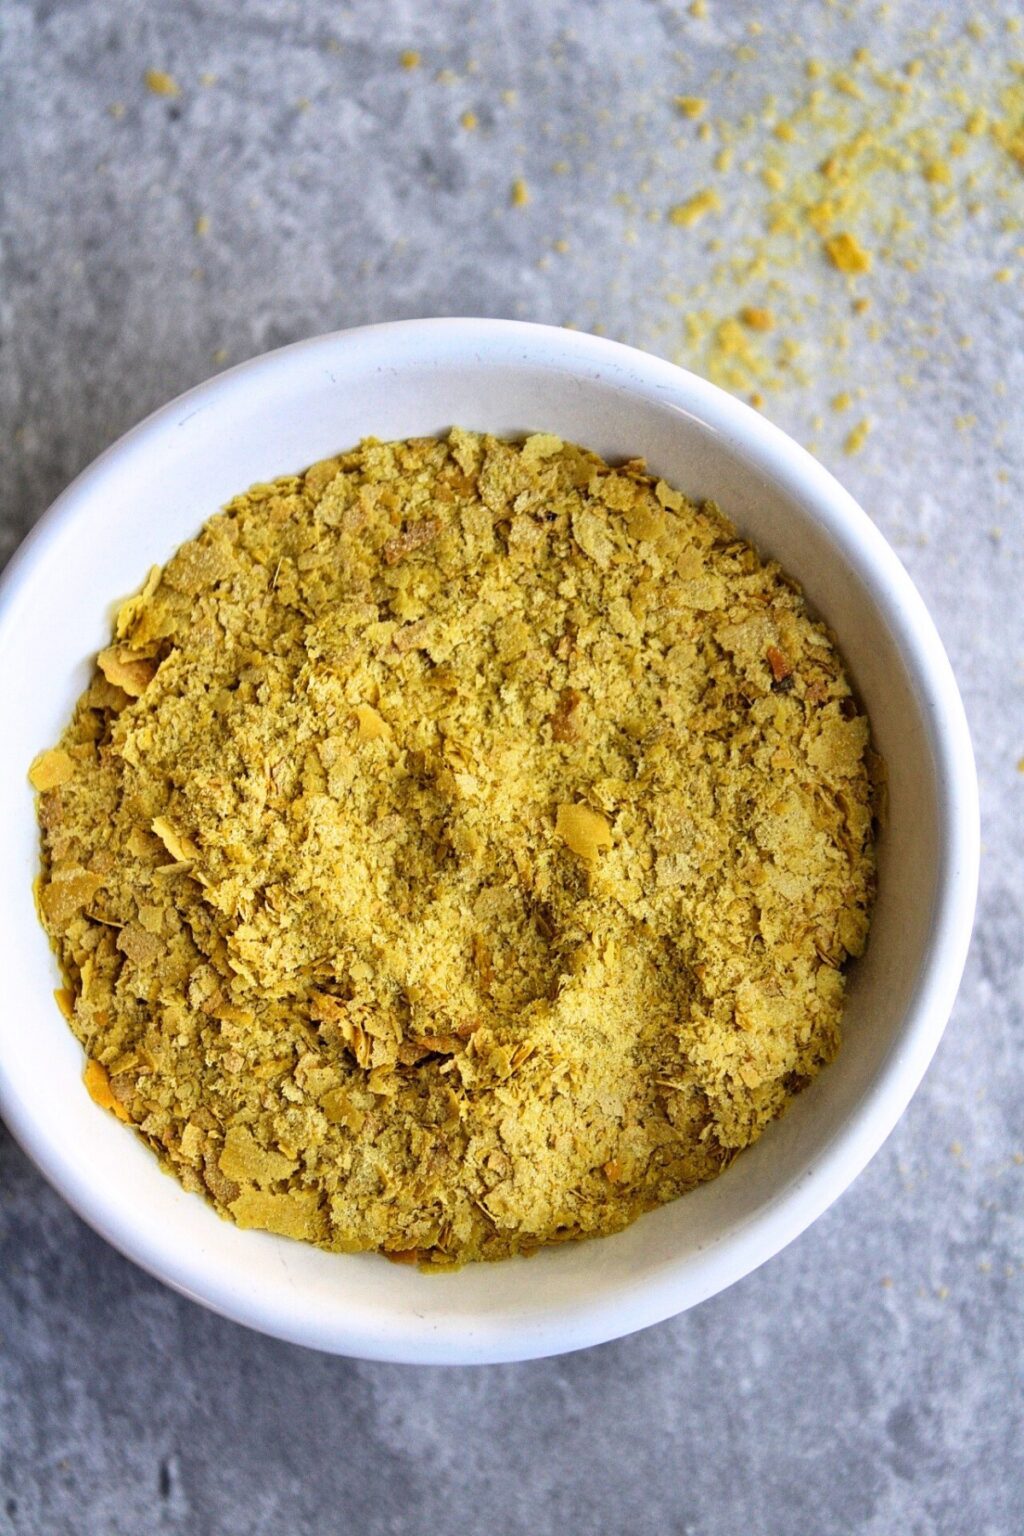 Nutritional yeast in a small bowl with a towel in the background. Vertical view.